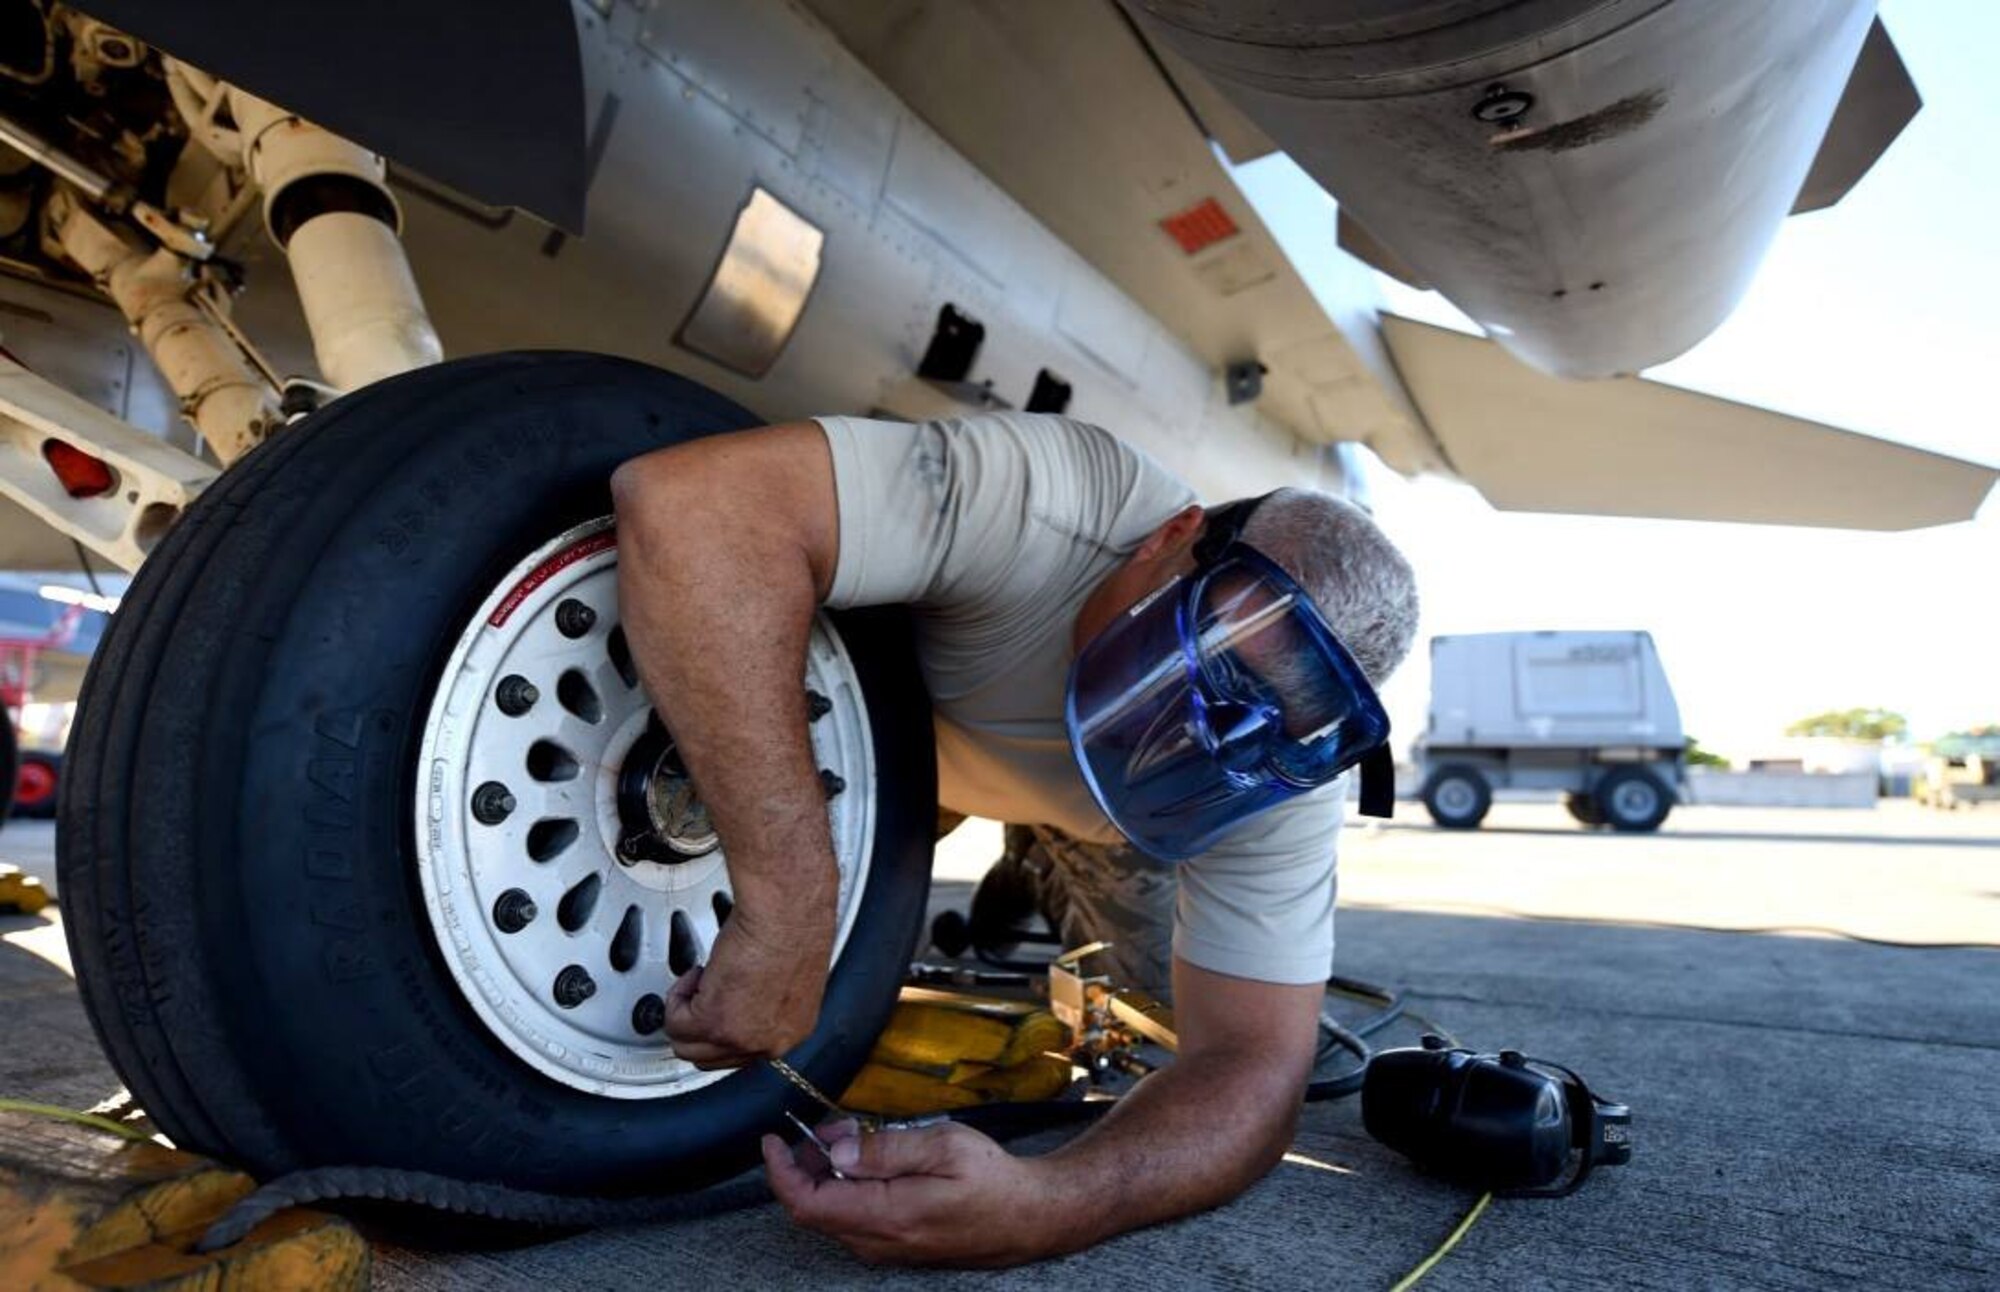 Master Sgt. Dwayne Gore, a crew chief with the 149th Fighter Wing, Texas Air National Guard, headquartered at Joint Base San Antonio-Lackland, Texas, services the tire of an F-16 Fighting Falcon at Joint Base Pearl Harbor Hickam, Hawaii, Aug. 18, 2016. Gore participated in Sentry Aloha 2016, a large-scale fighter exercise hosted by the Hawaii Air National Guard. (U.S. Air National Guard photo by Tech. Sgt. Rebekkah Jandron)